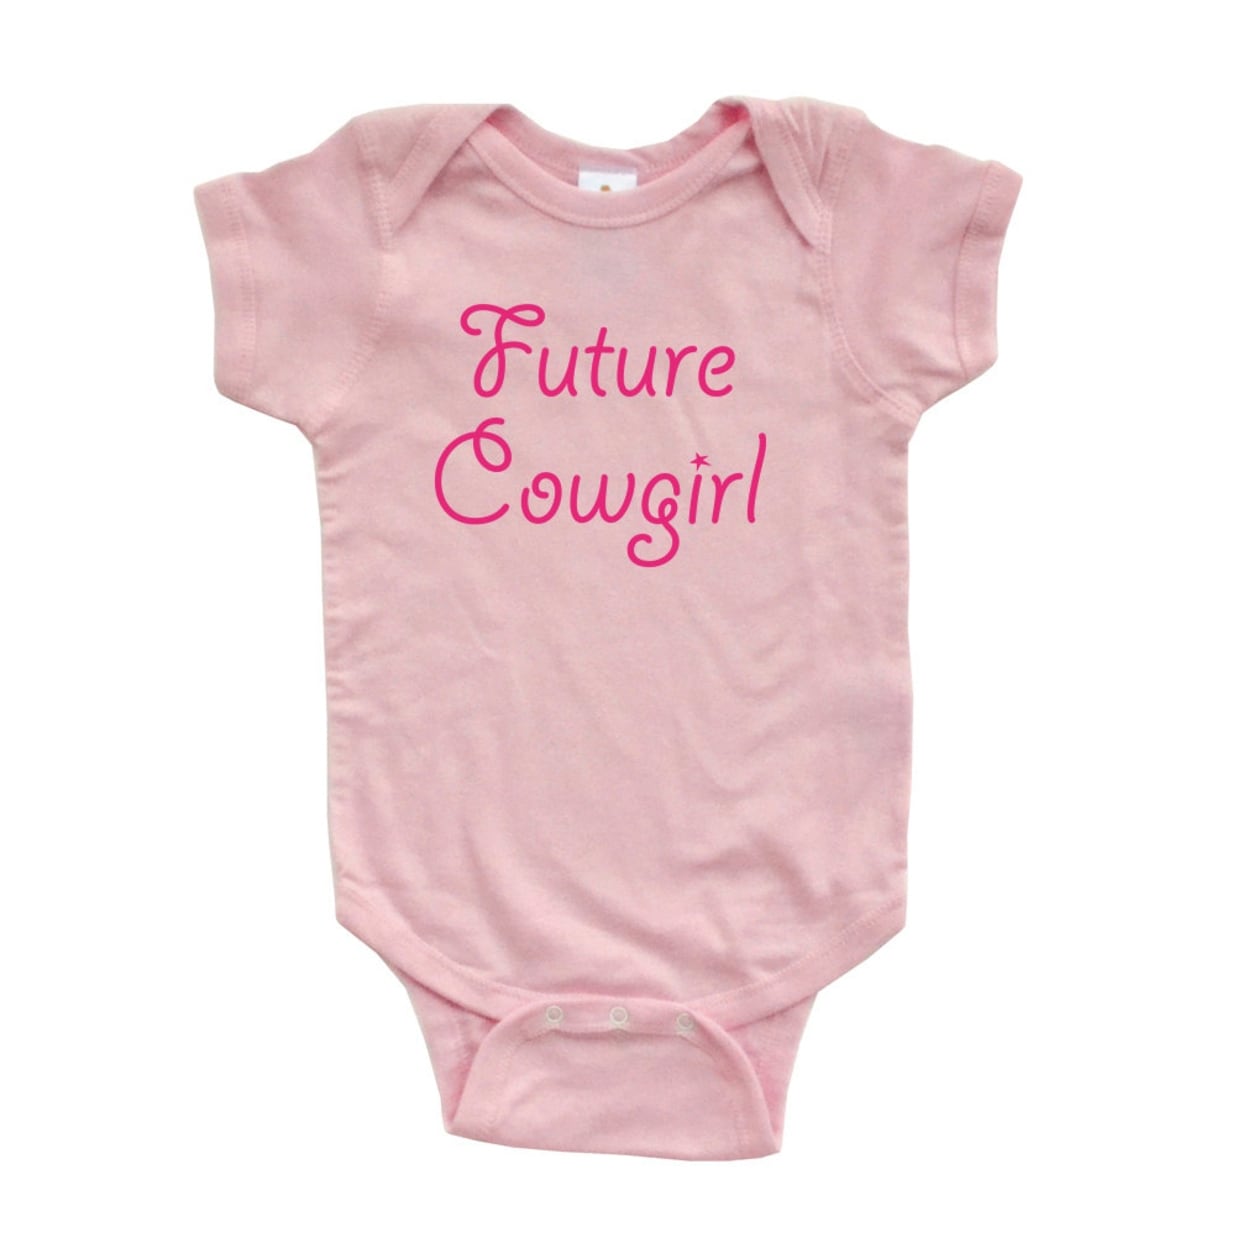 cowgirl baby clothes